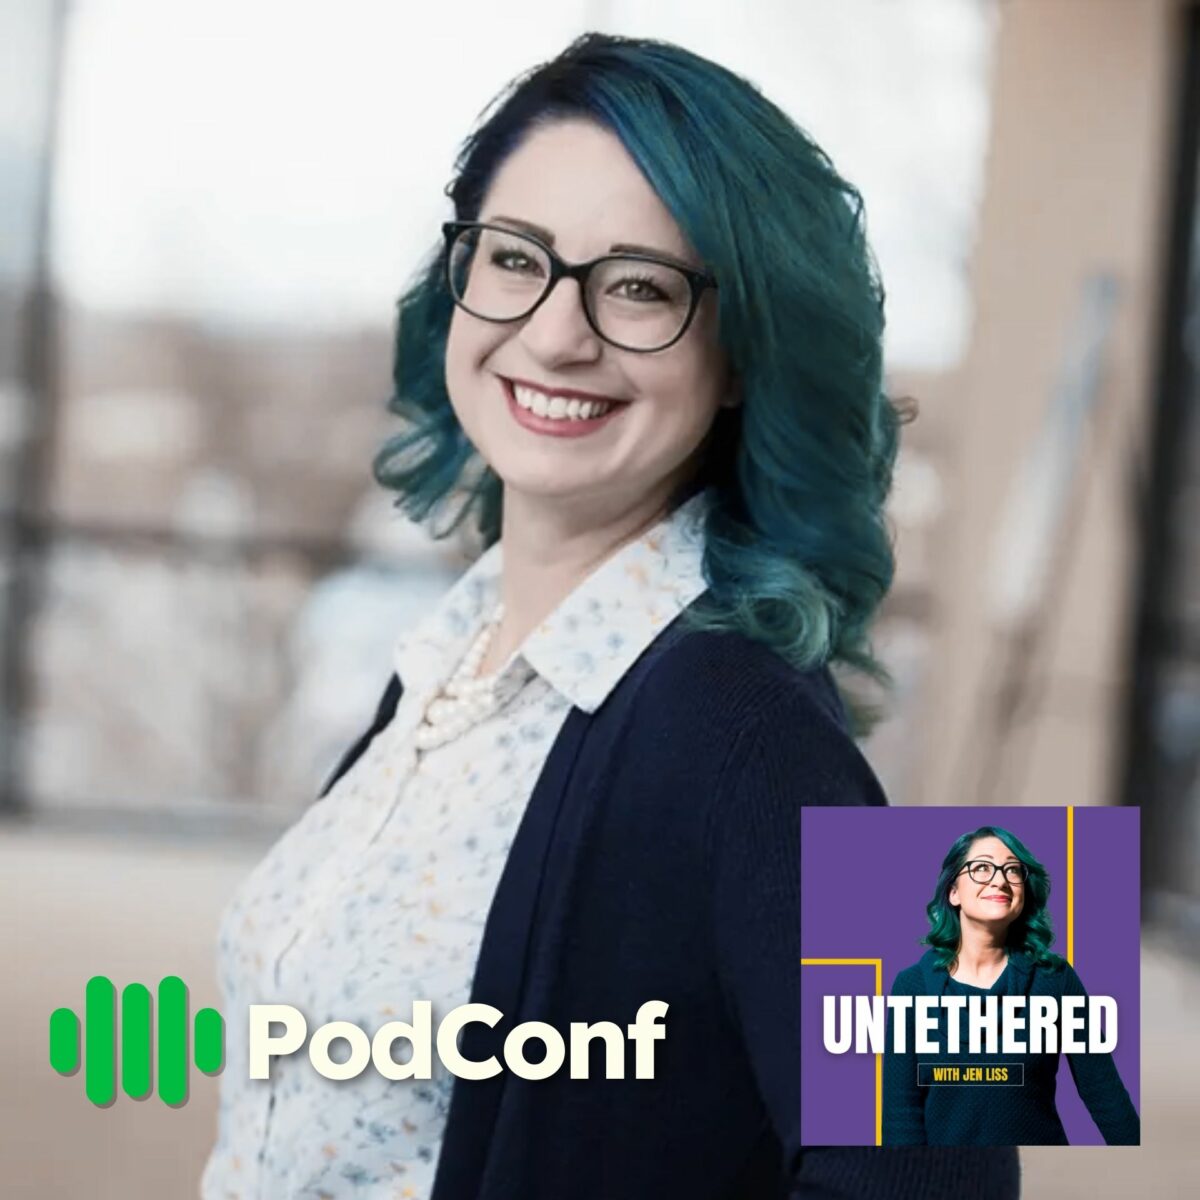 Jen Liss / Untethered with Jen Liss / PodConf